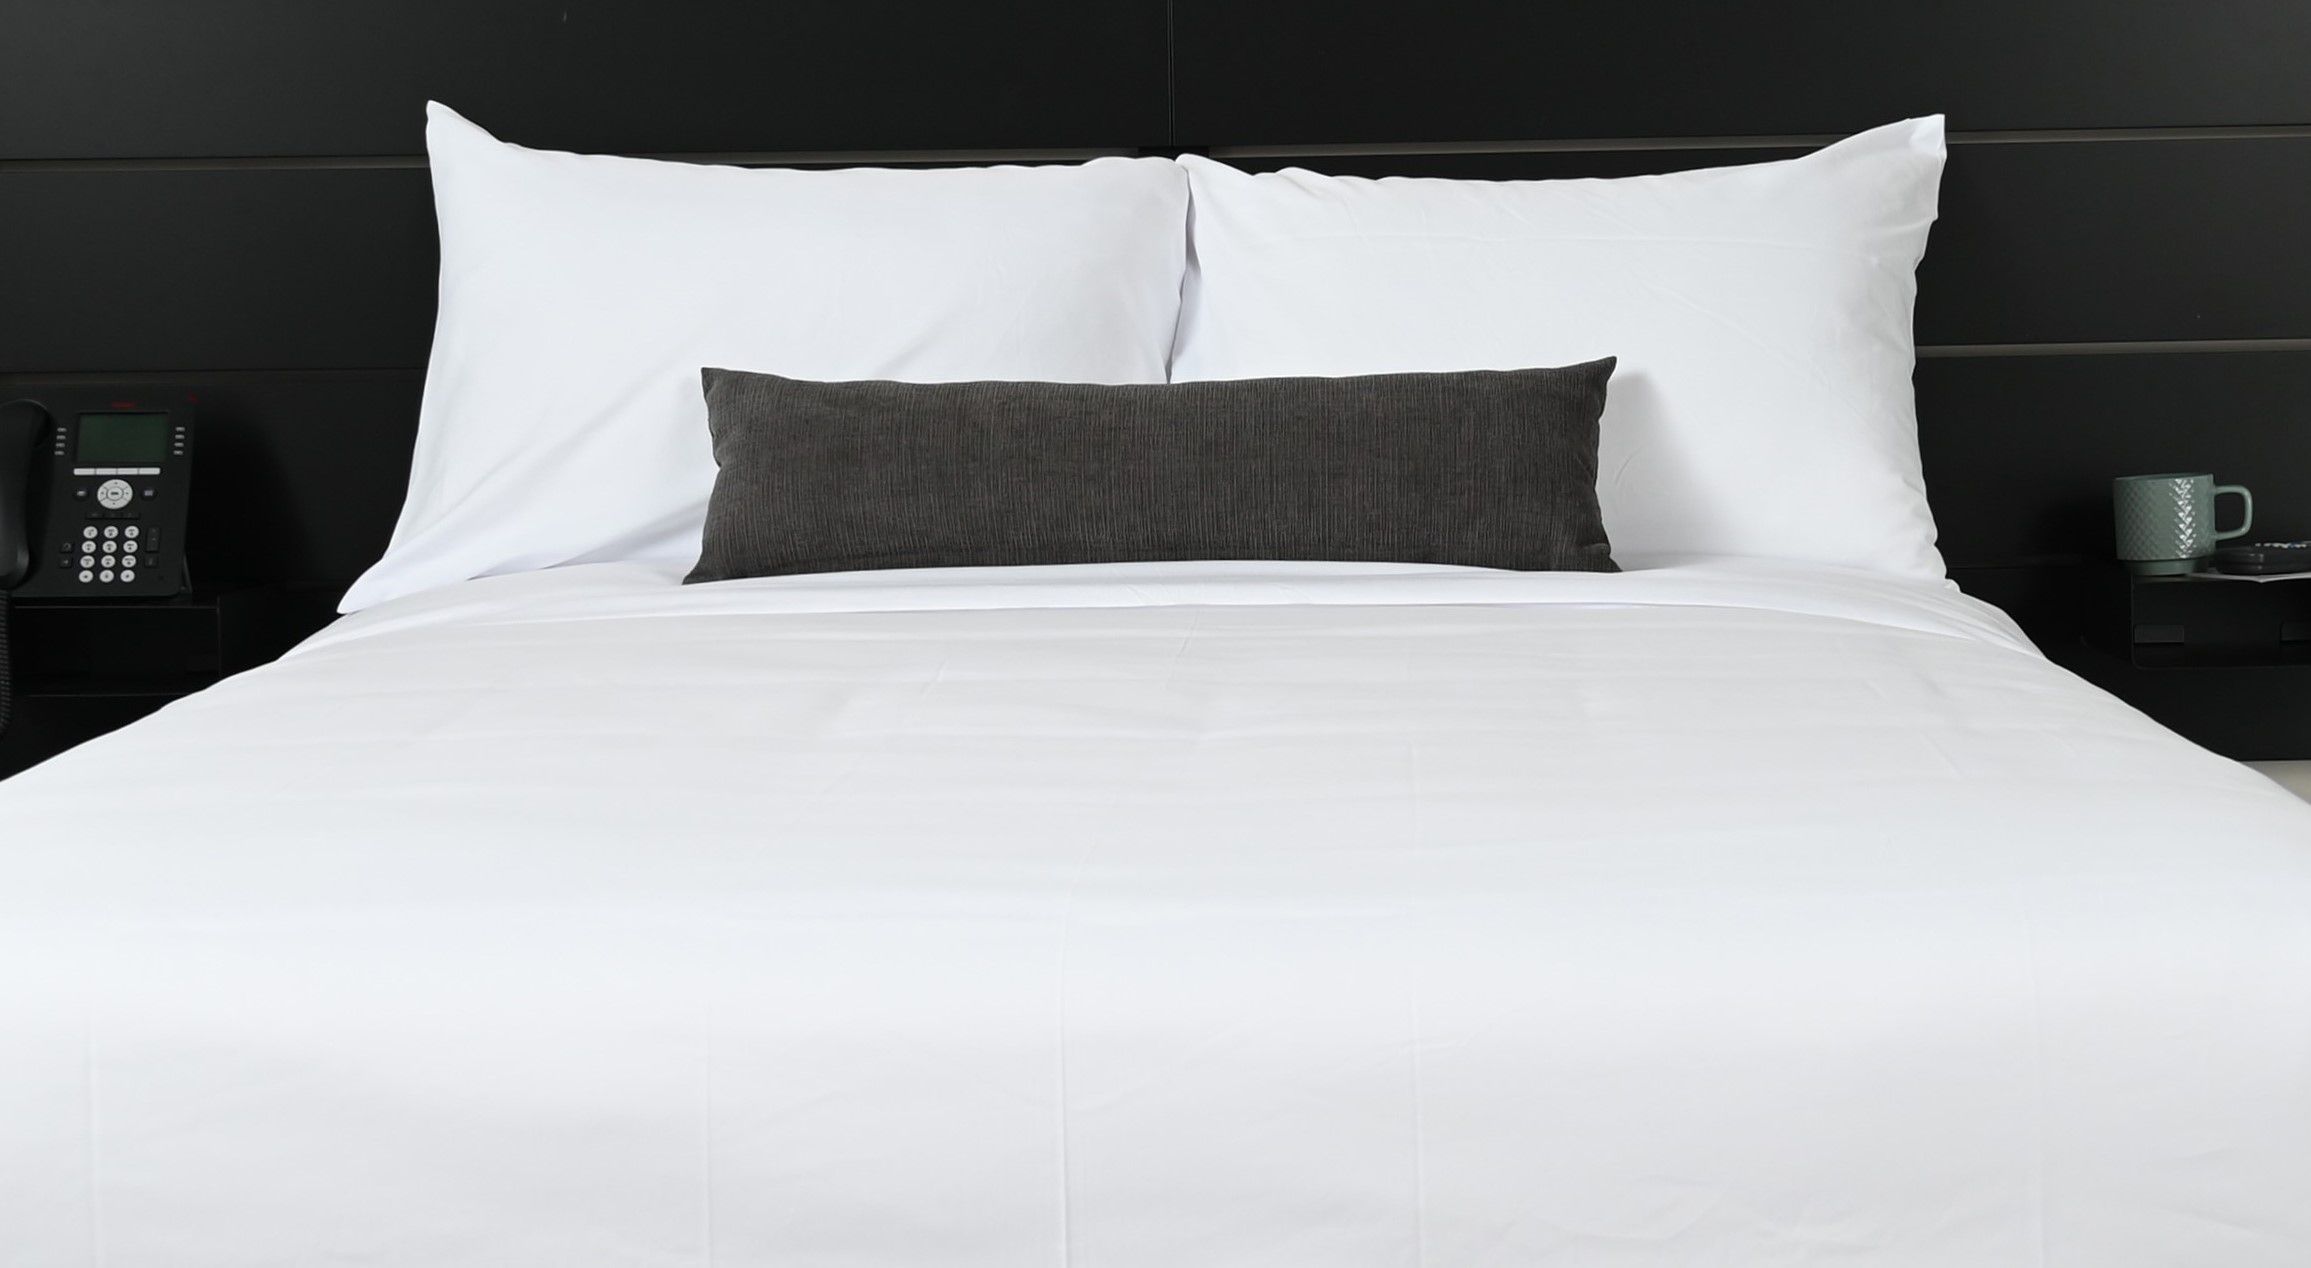 Microfiber vs. Cotton: Which is best for your hotel?